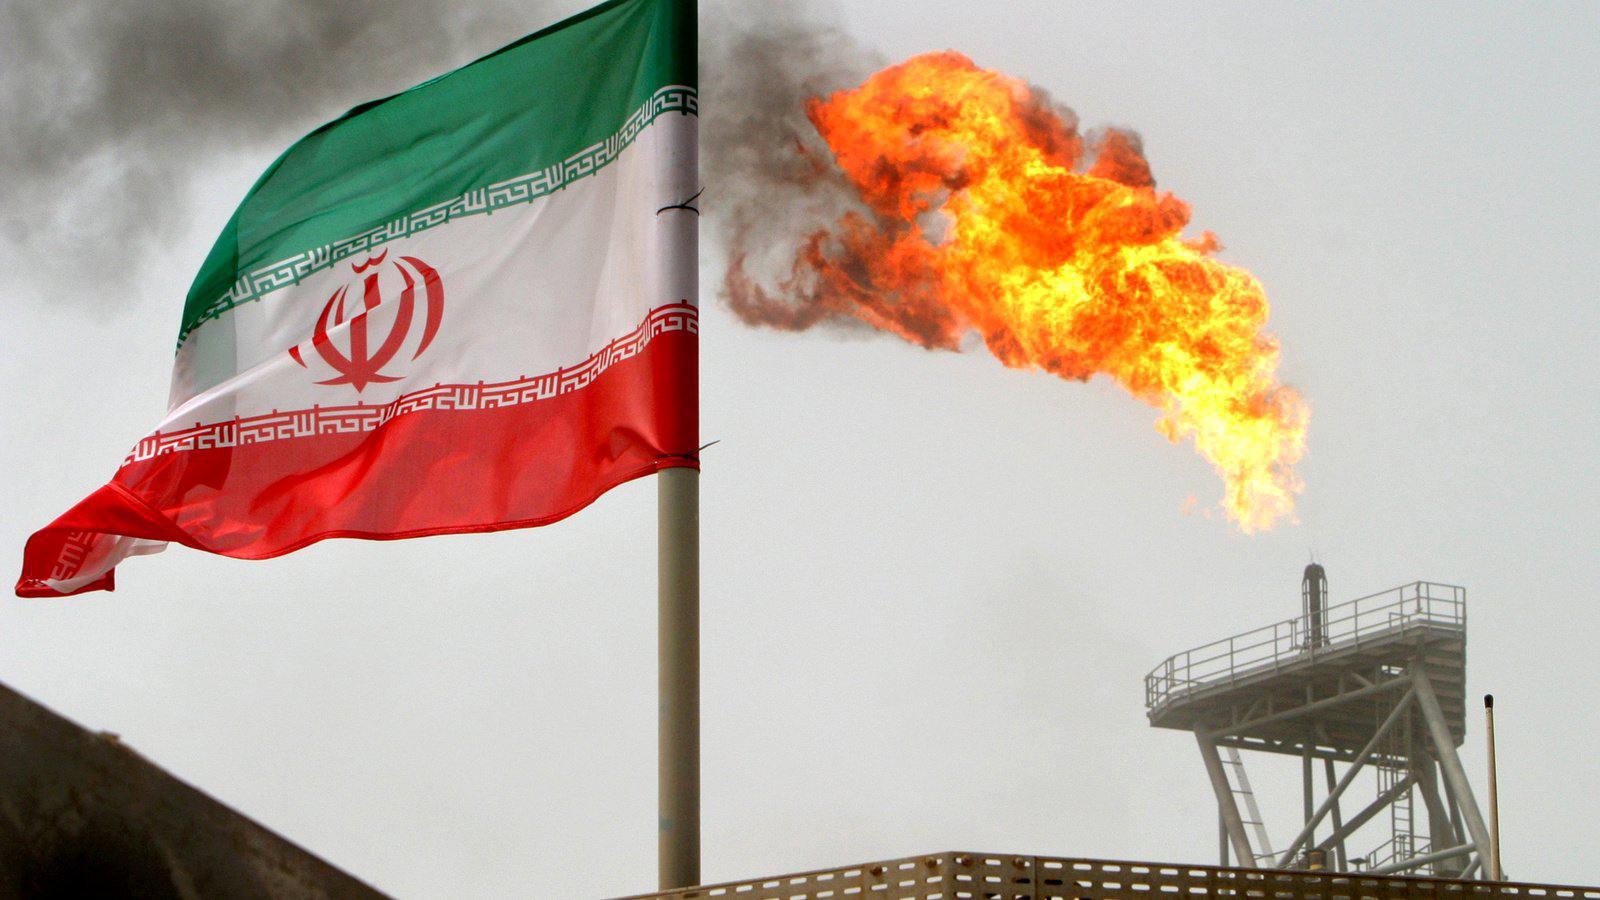 ifmat - Iran looks to expand oil influence in Africa through new pipeline